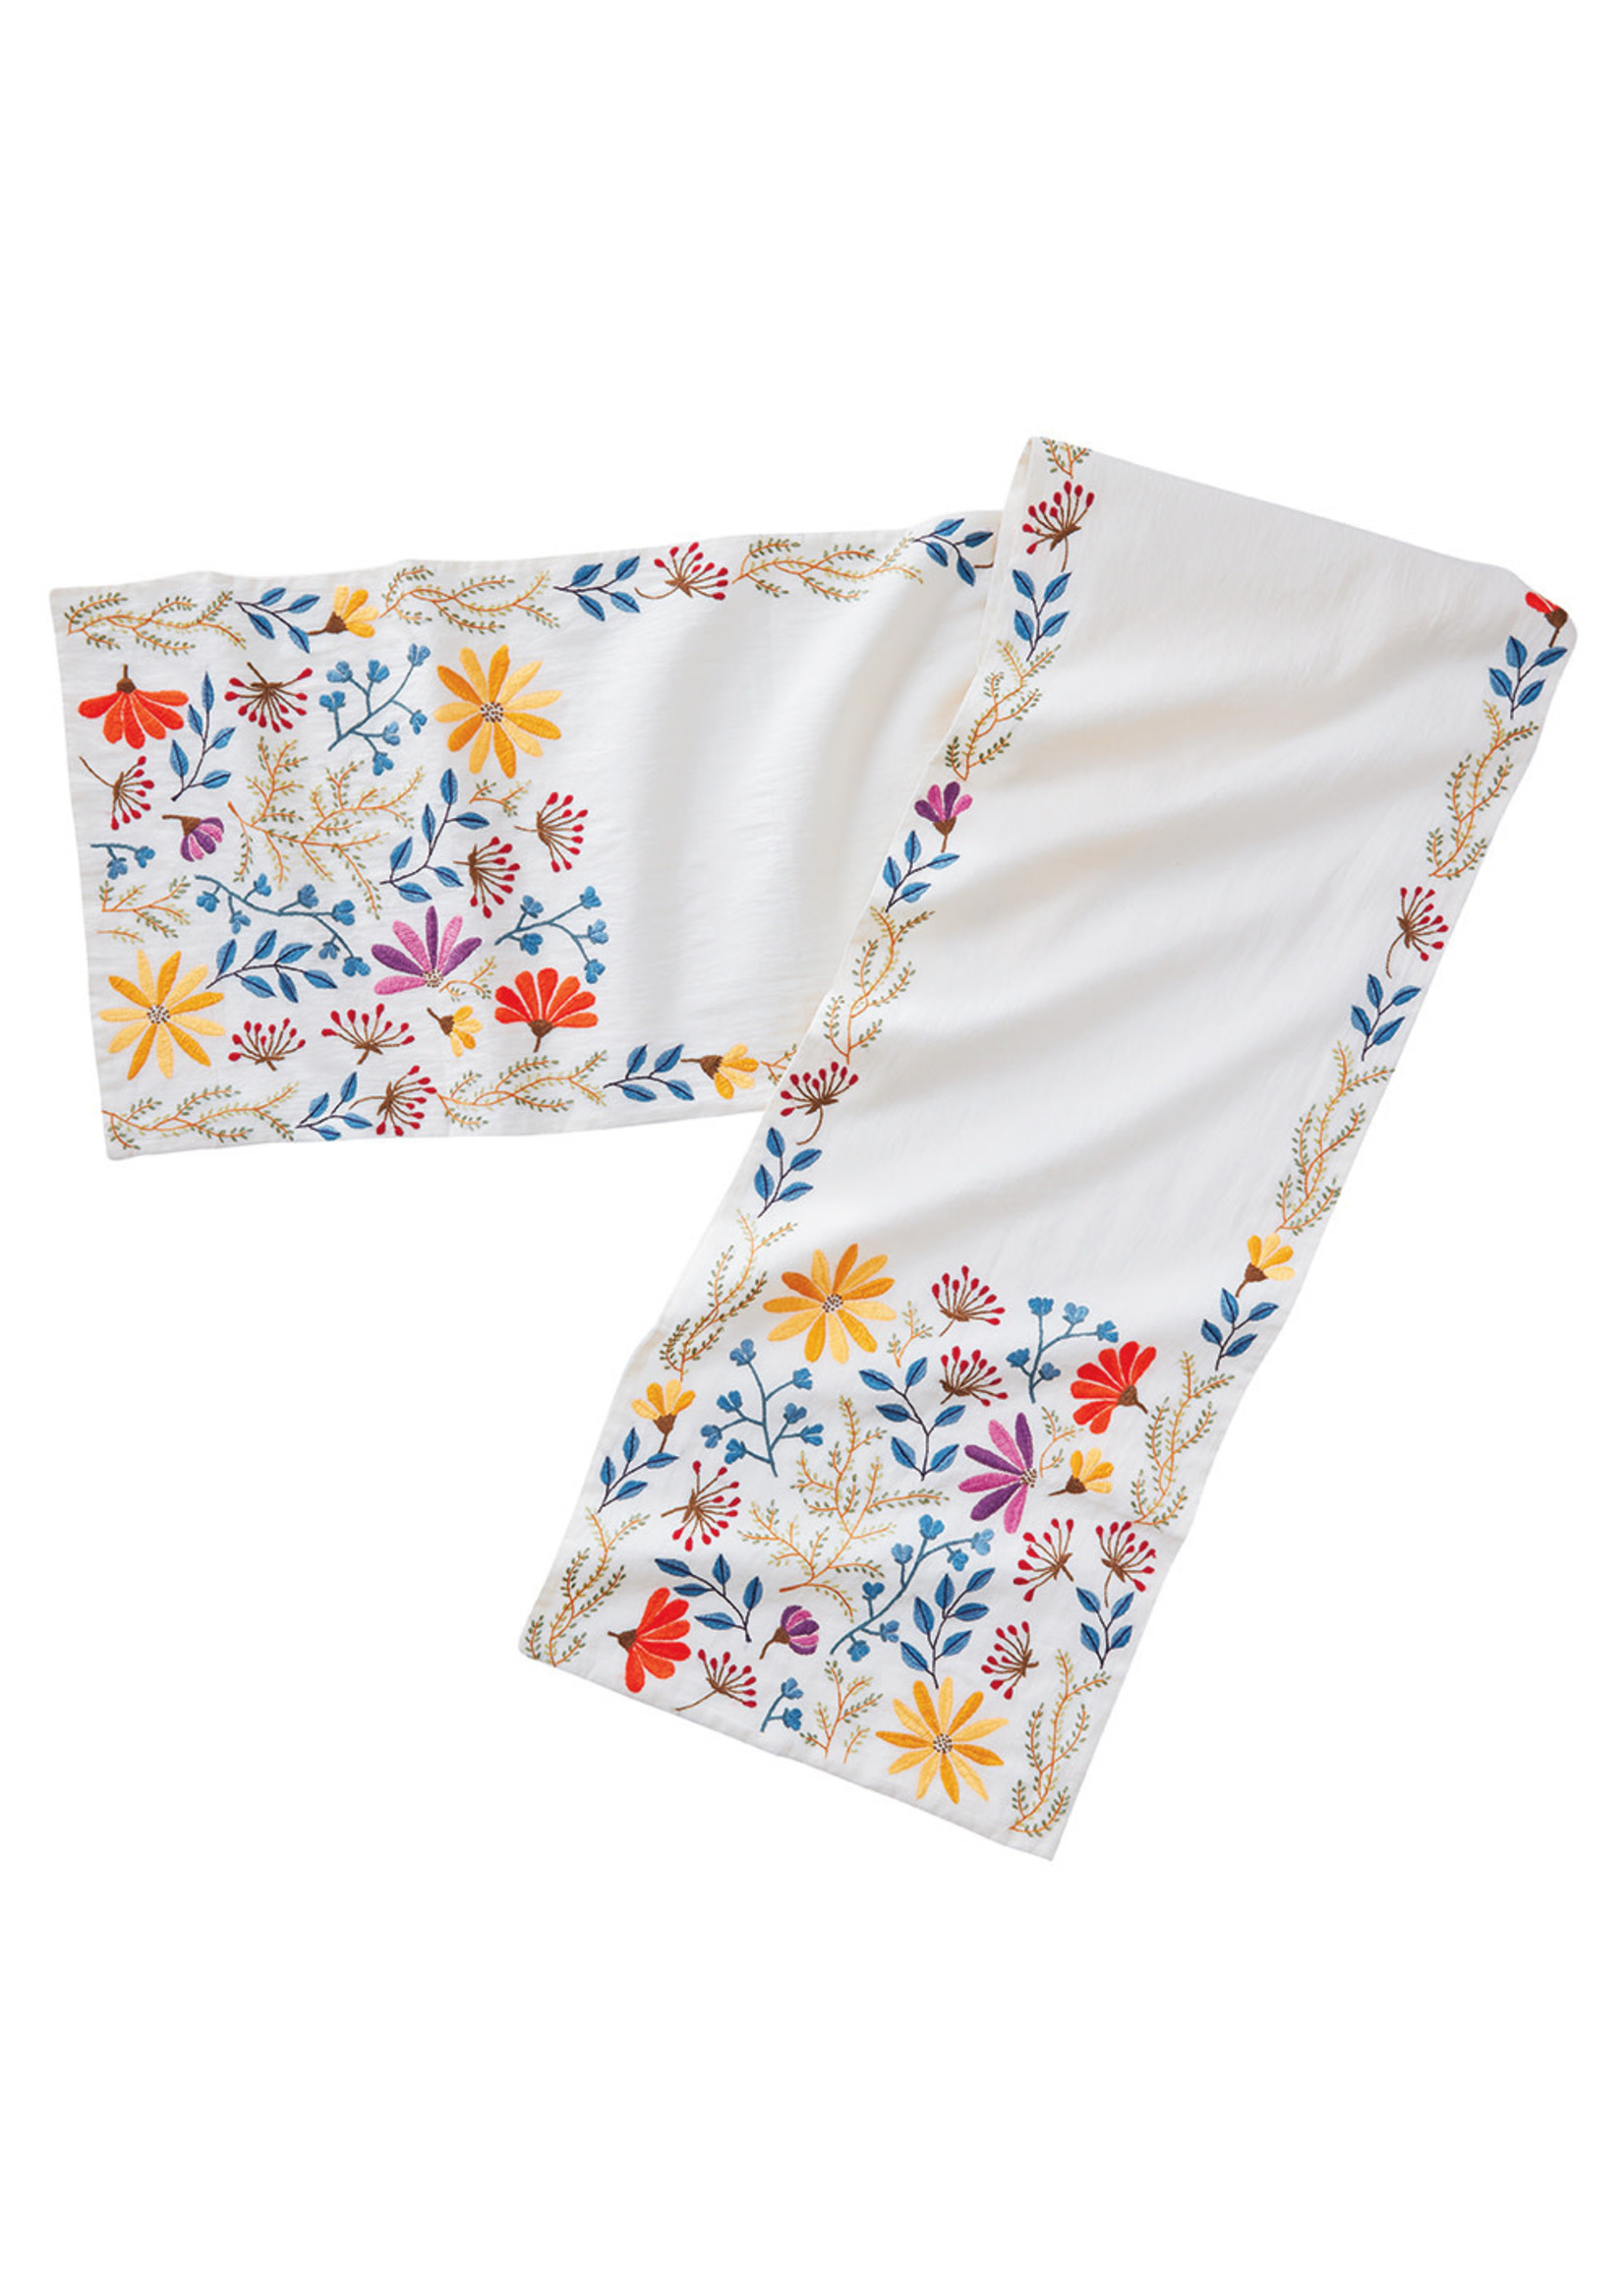 Table Runner - Embroidered Shalimar Meadow